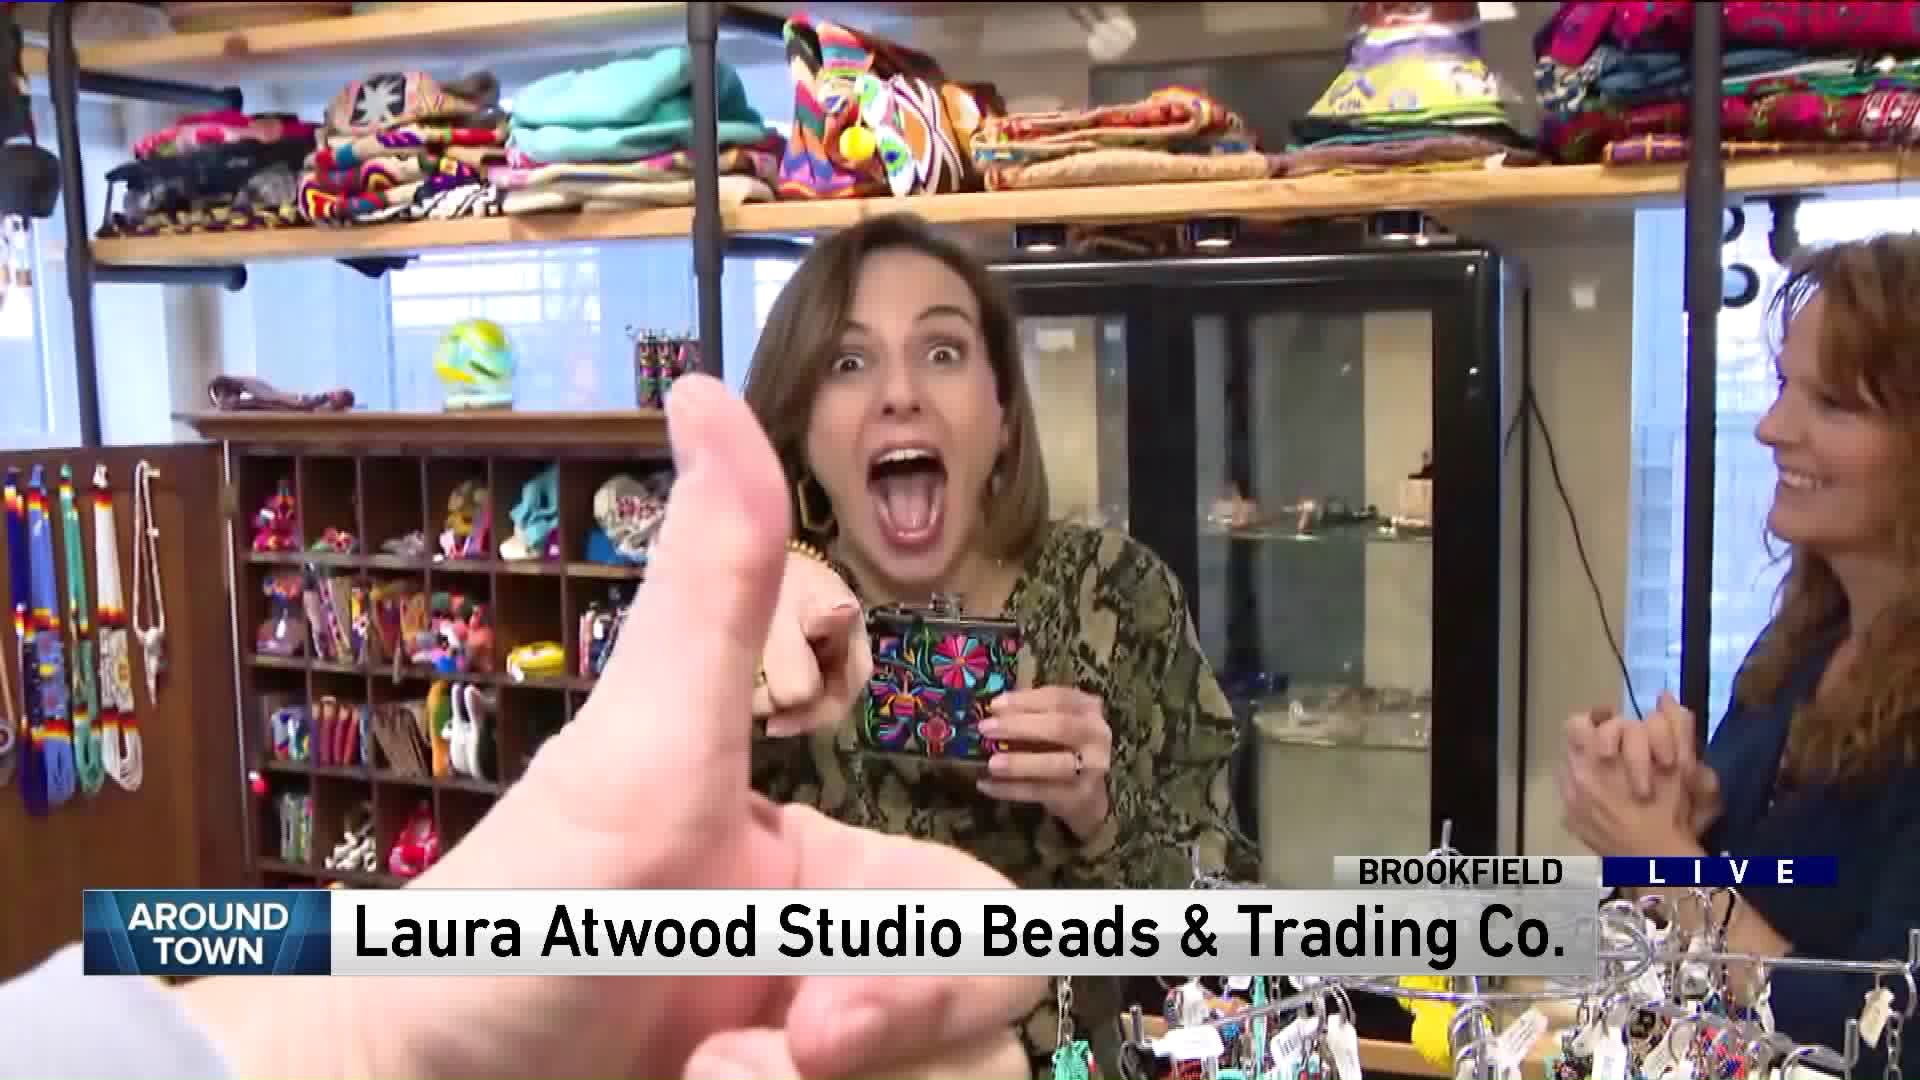 Around Town visits Laura Atwood Studio – Beads & Trading Co.